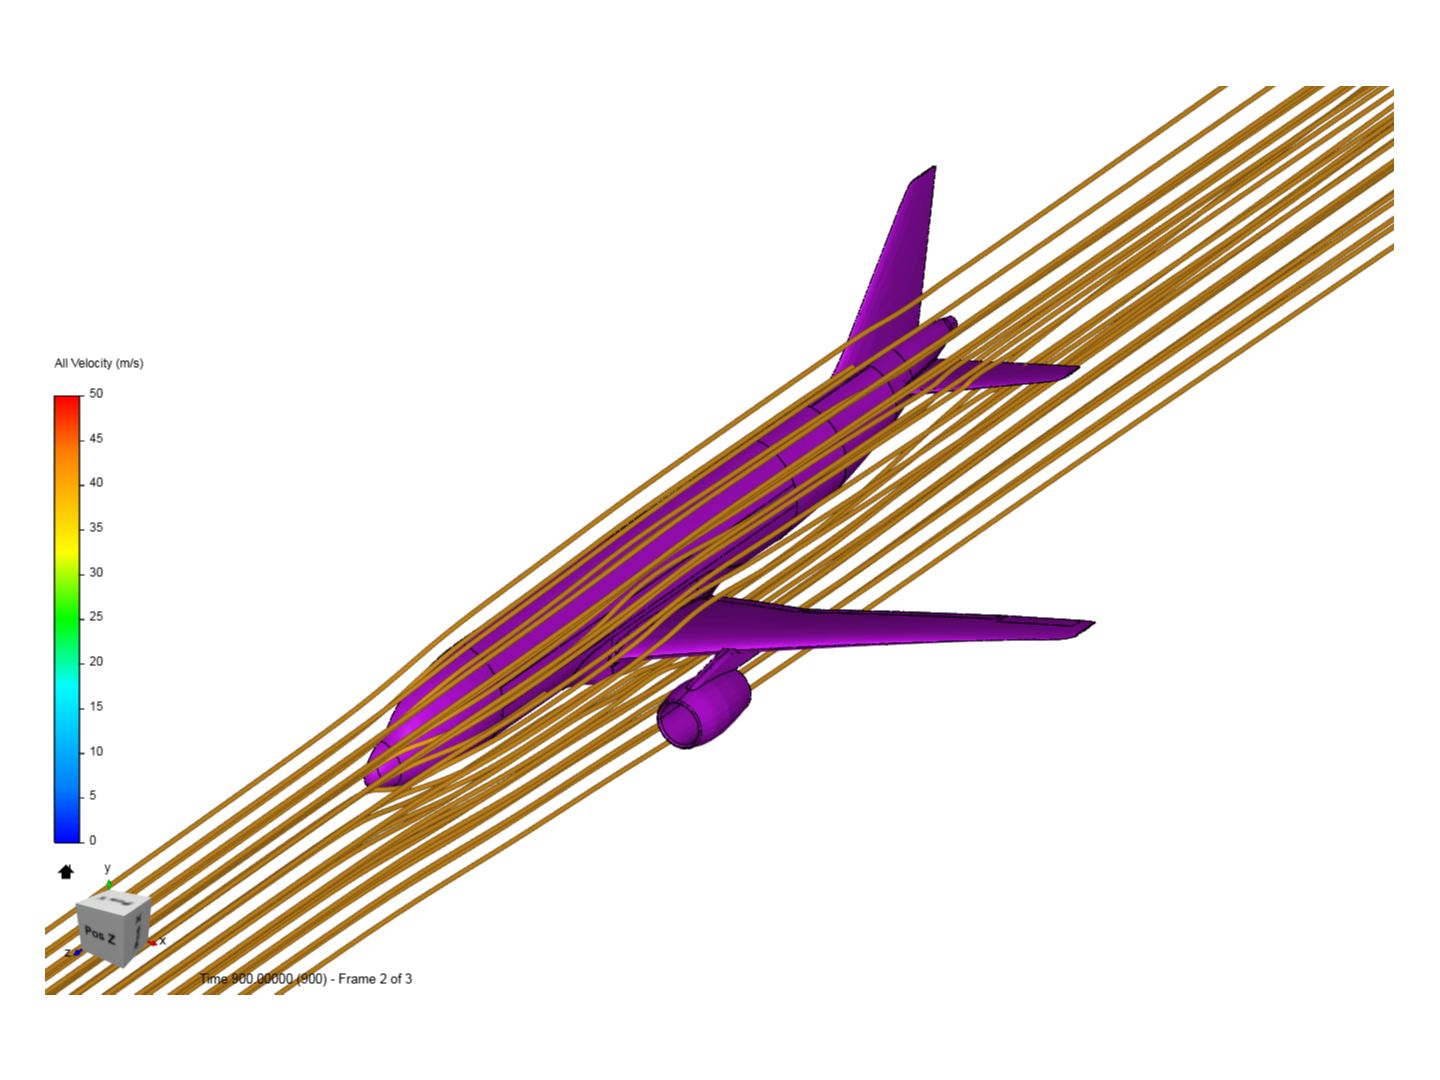 Airflow around a commercial aircraft image